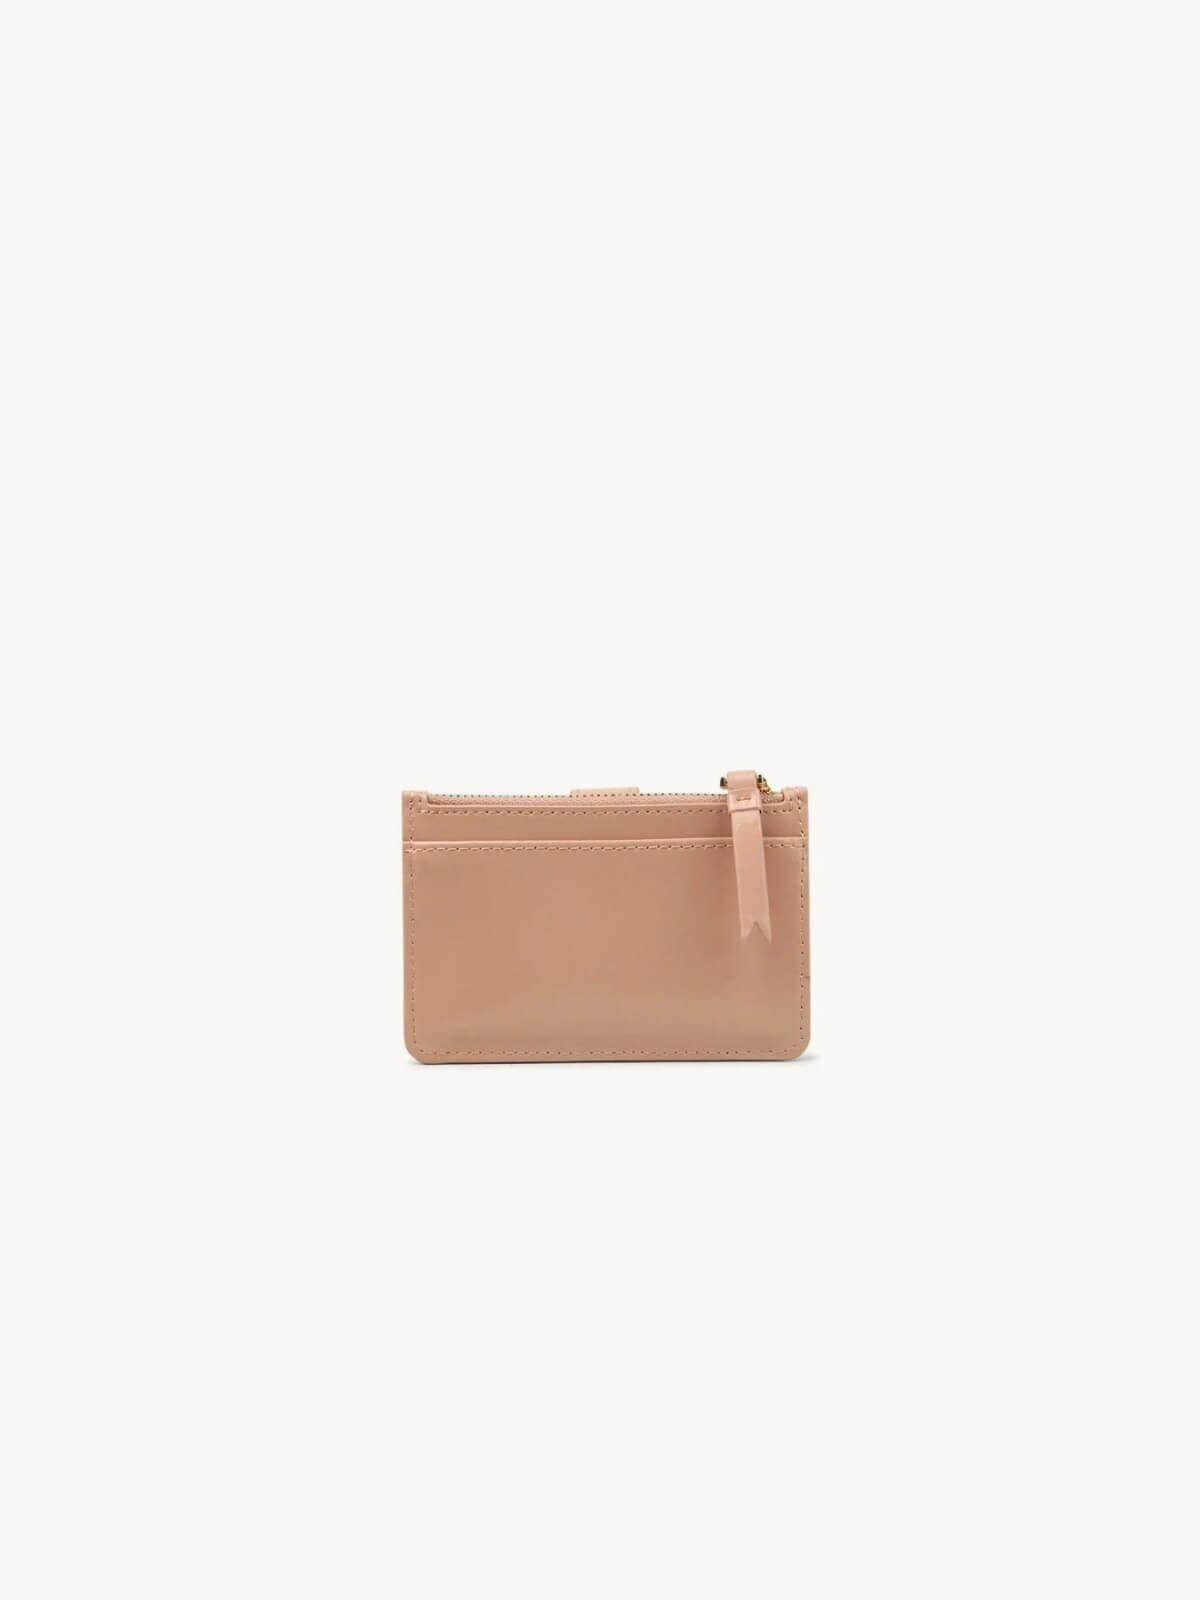 Dylan Kain | The Zoe Patent Card Wallet - Fawn - Light Gold | Perlu